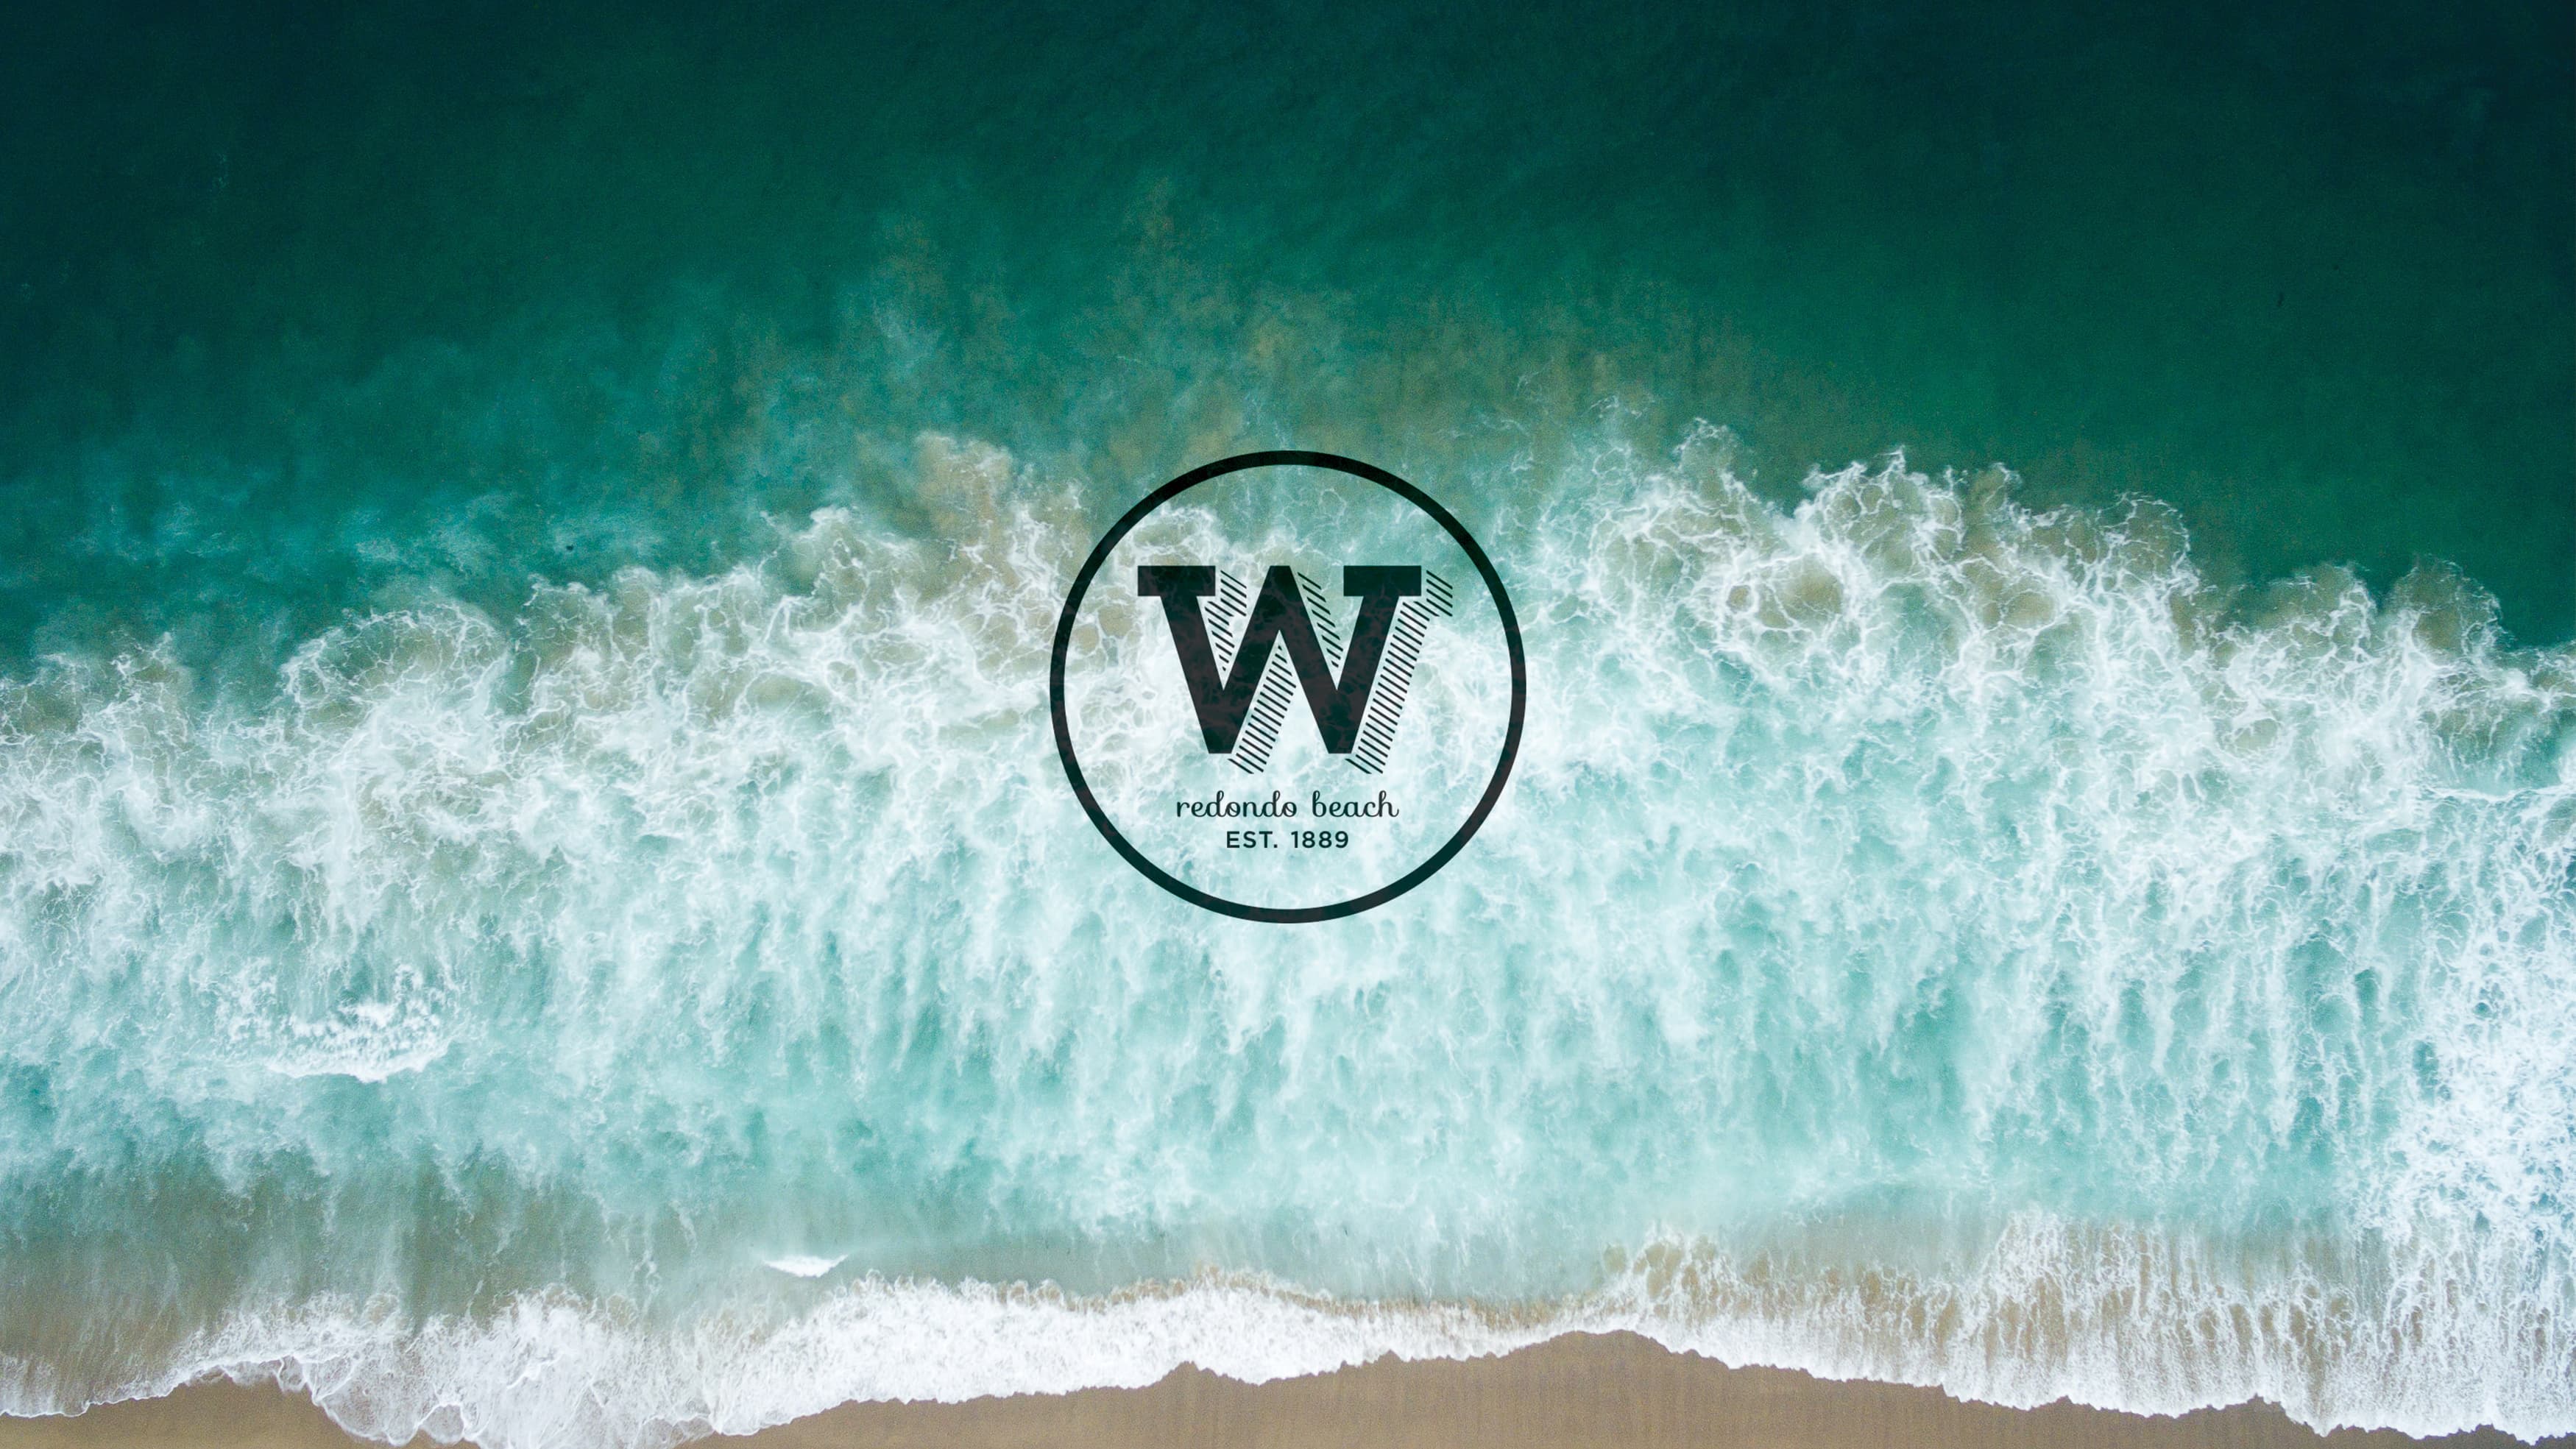 The waterftont branding prepared by RSM Design over image of the waves.